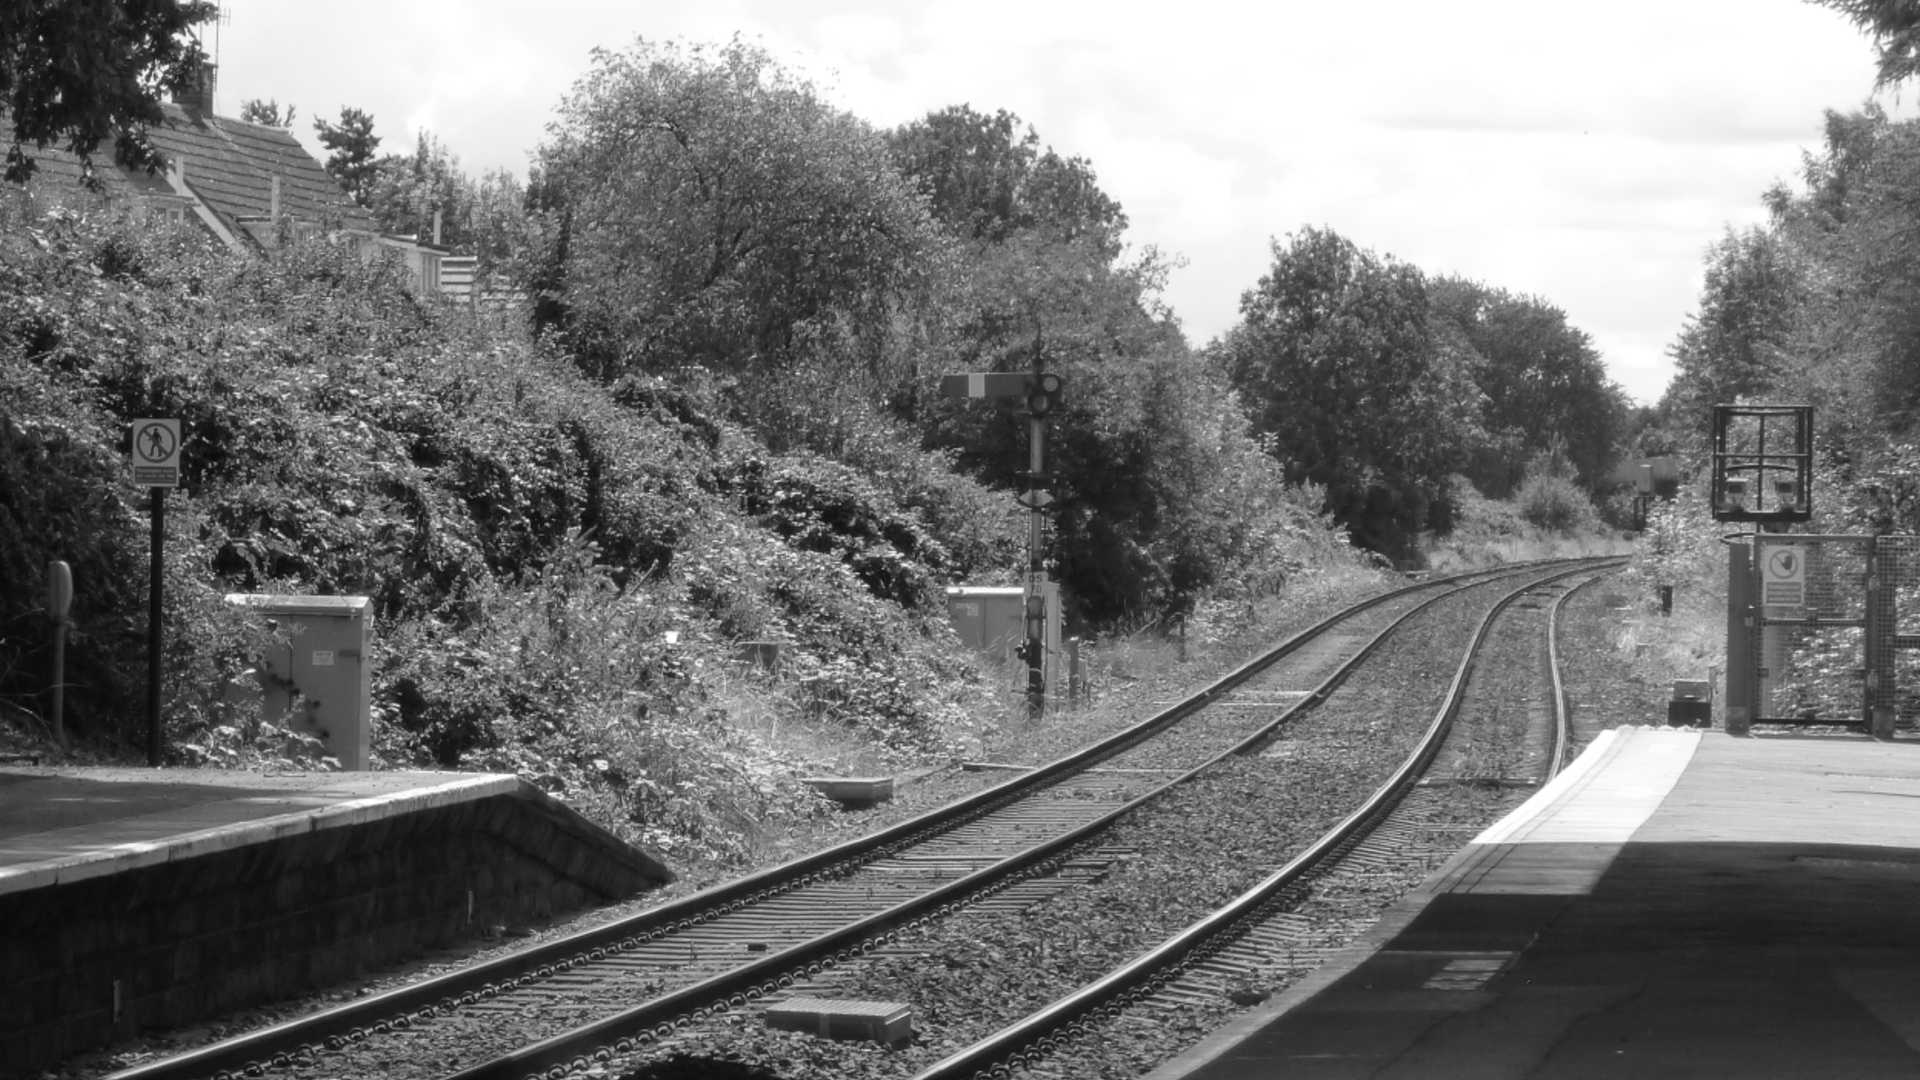 "Droitwich Spa Station - Ombersley Way bridge" by Elliott Brown, used under CC BY 2.0 / Cropped, desaturated and resampled from original